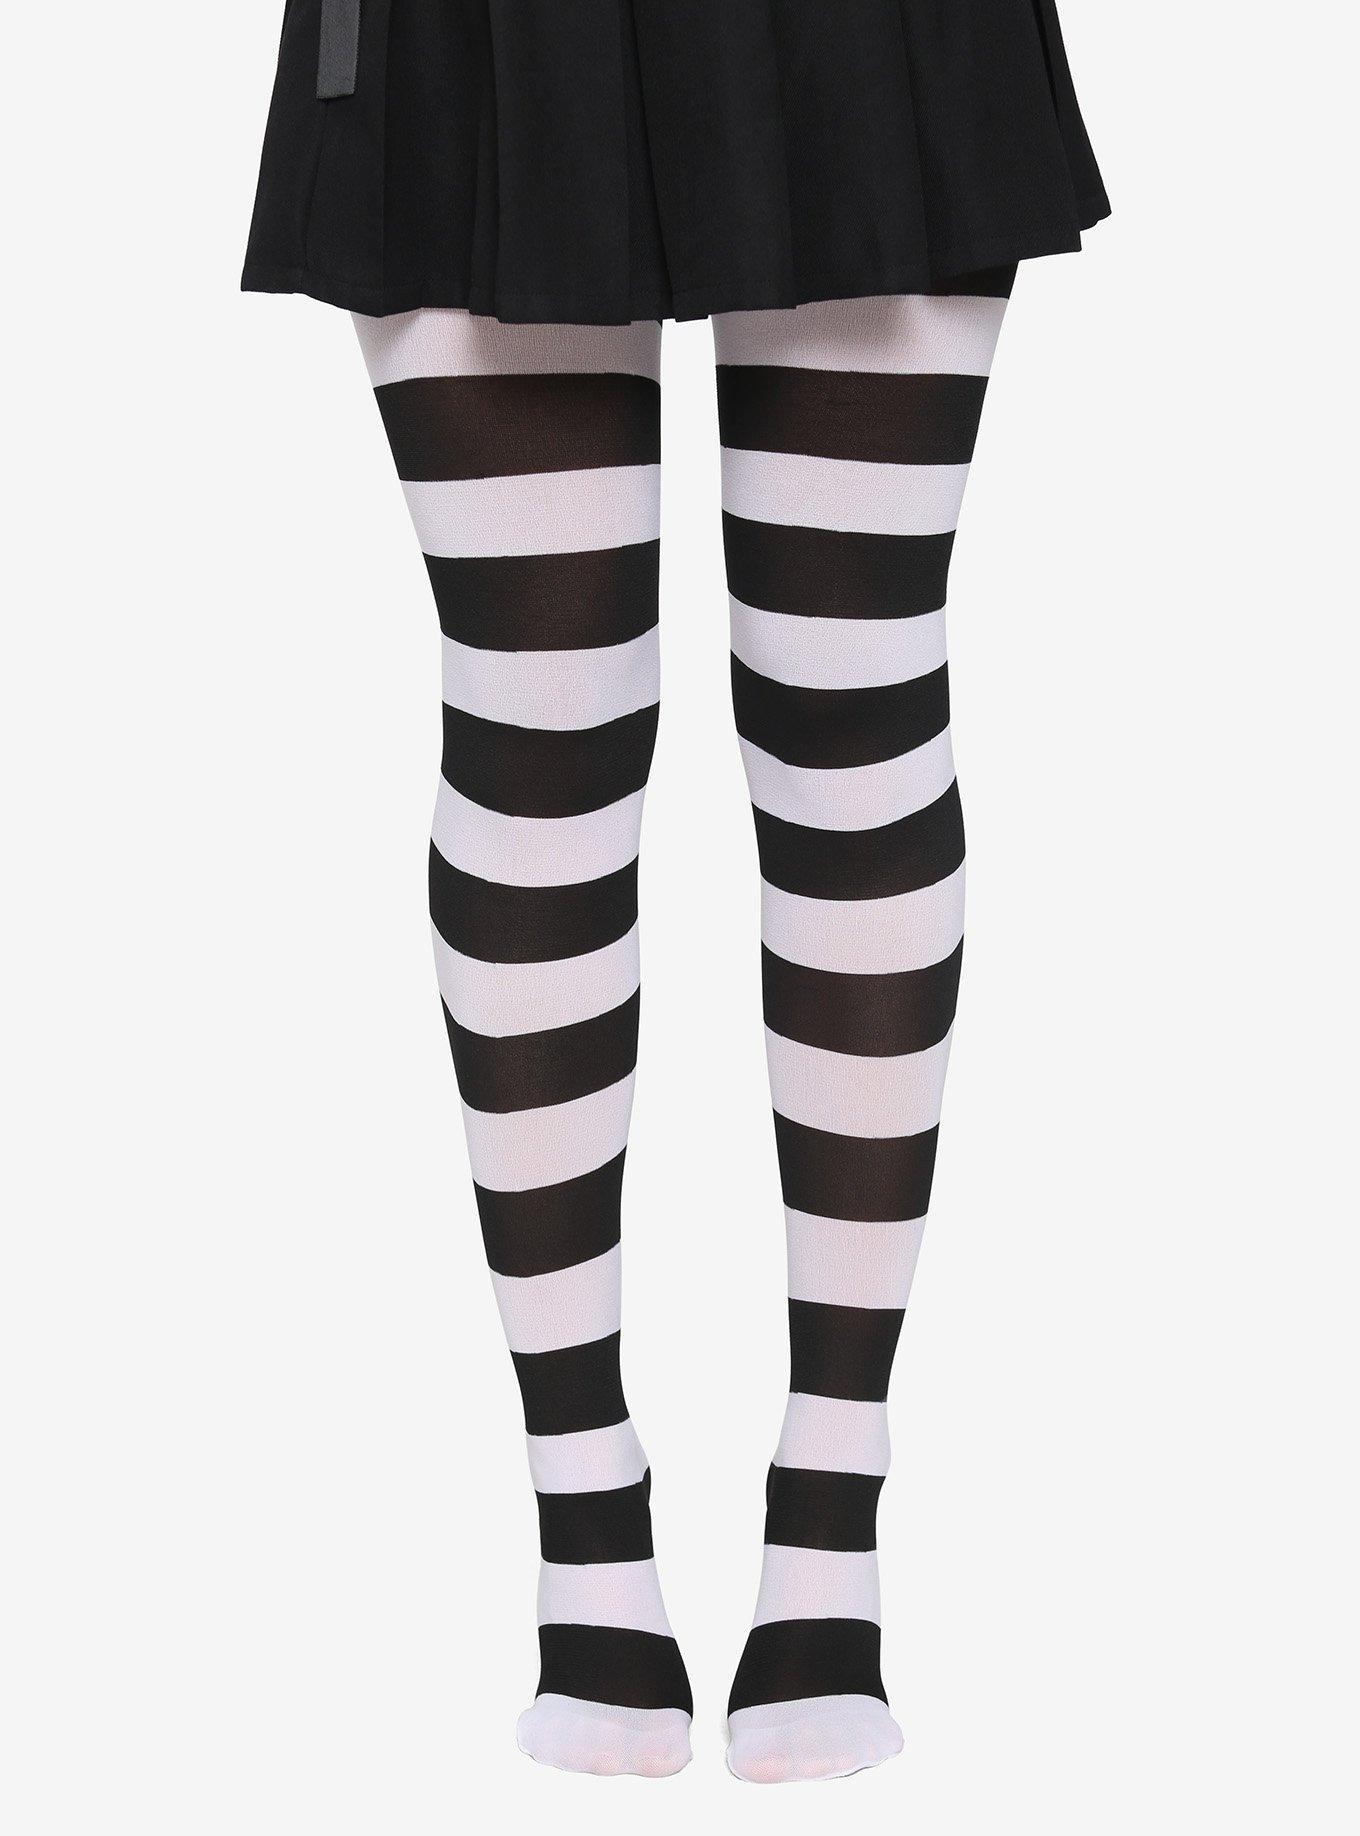 Black And White Tights | peacecommission.kdsg.gov.ng